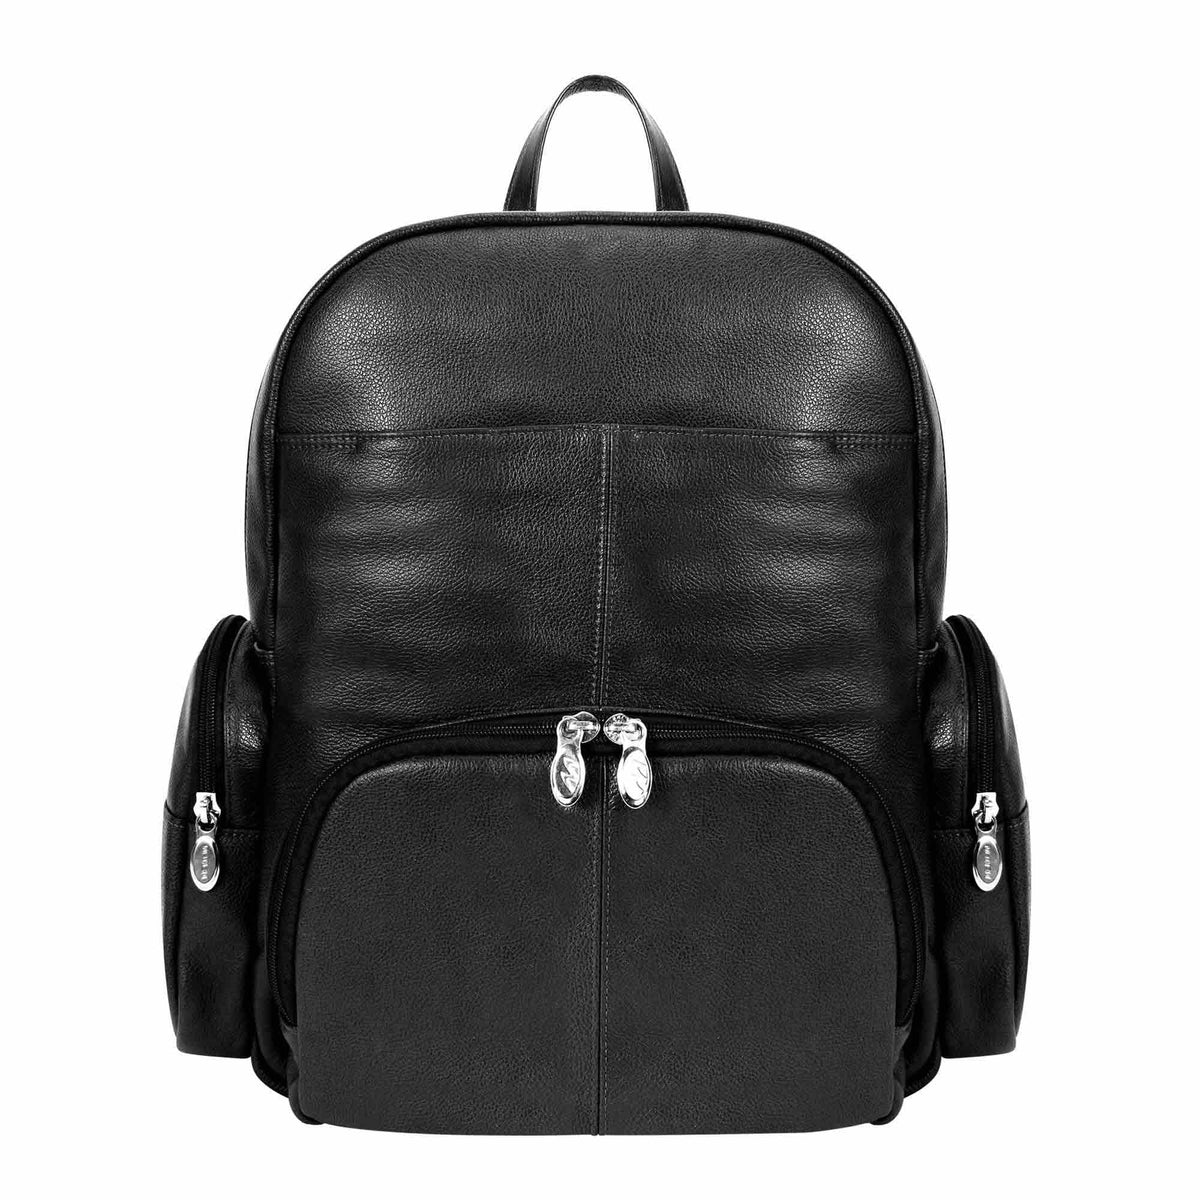 McKlein USA Cumberland 15" Leather Dual Compartment Laptop Backpack